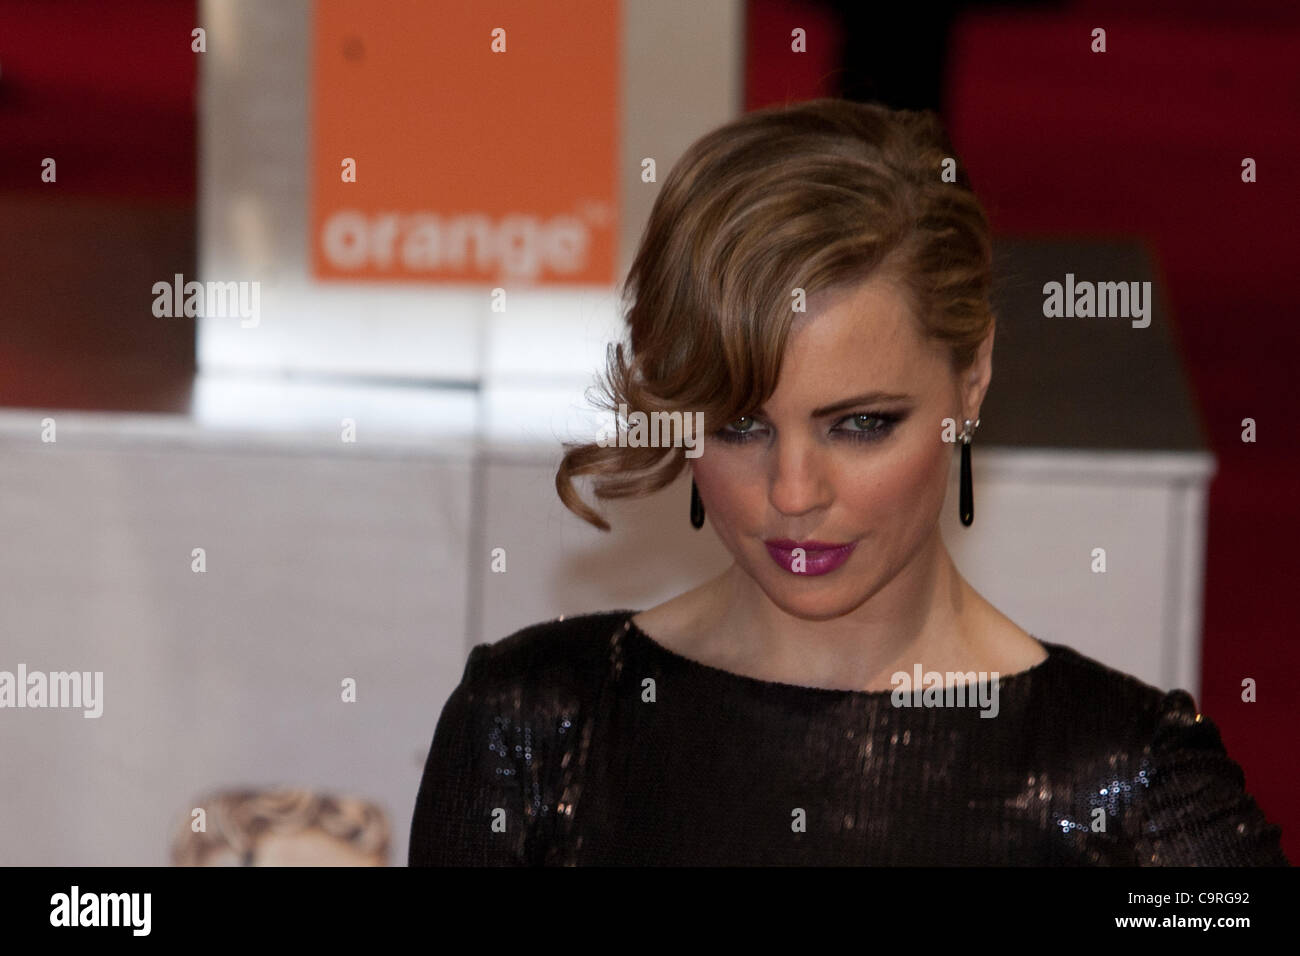 London, UK, 12/02/2012. Australian actress Melissa George, arriving on the red carpet to attend the 2012 BAFTAs Stock Photo